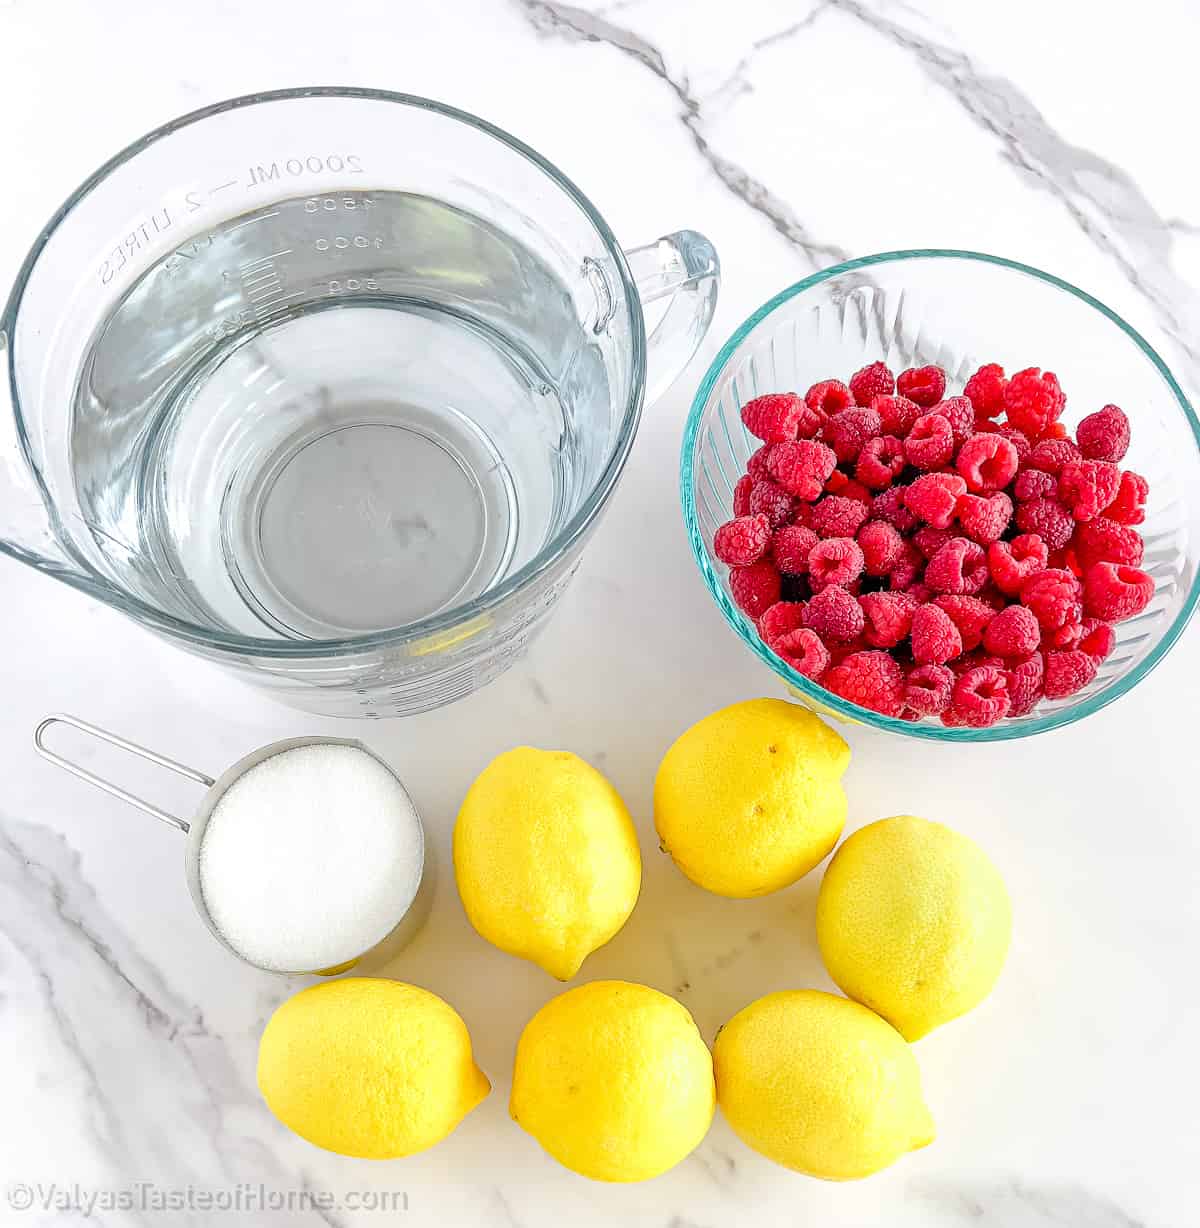 All you need are some simple, pantry staple ingredients to make this delicious lemonade at home.